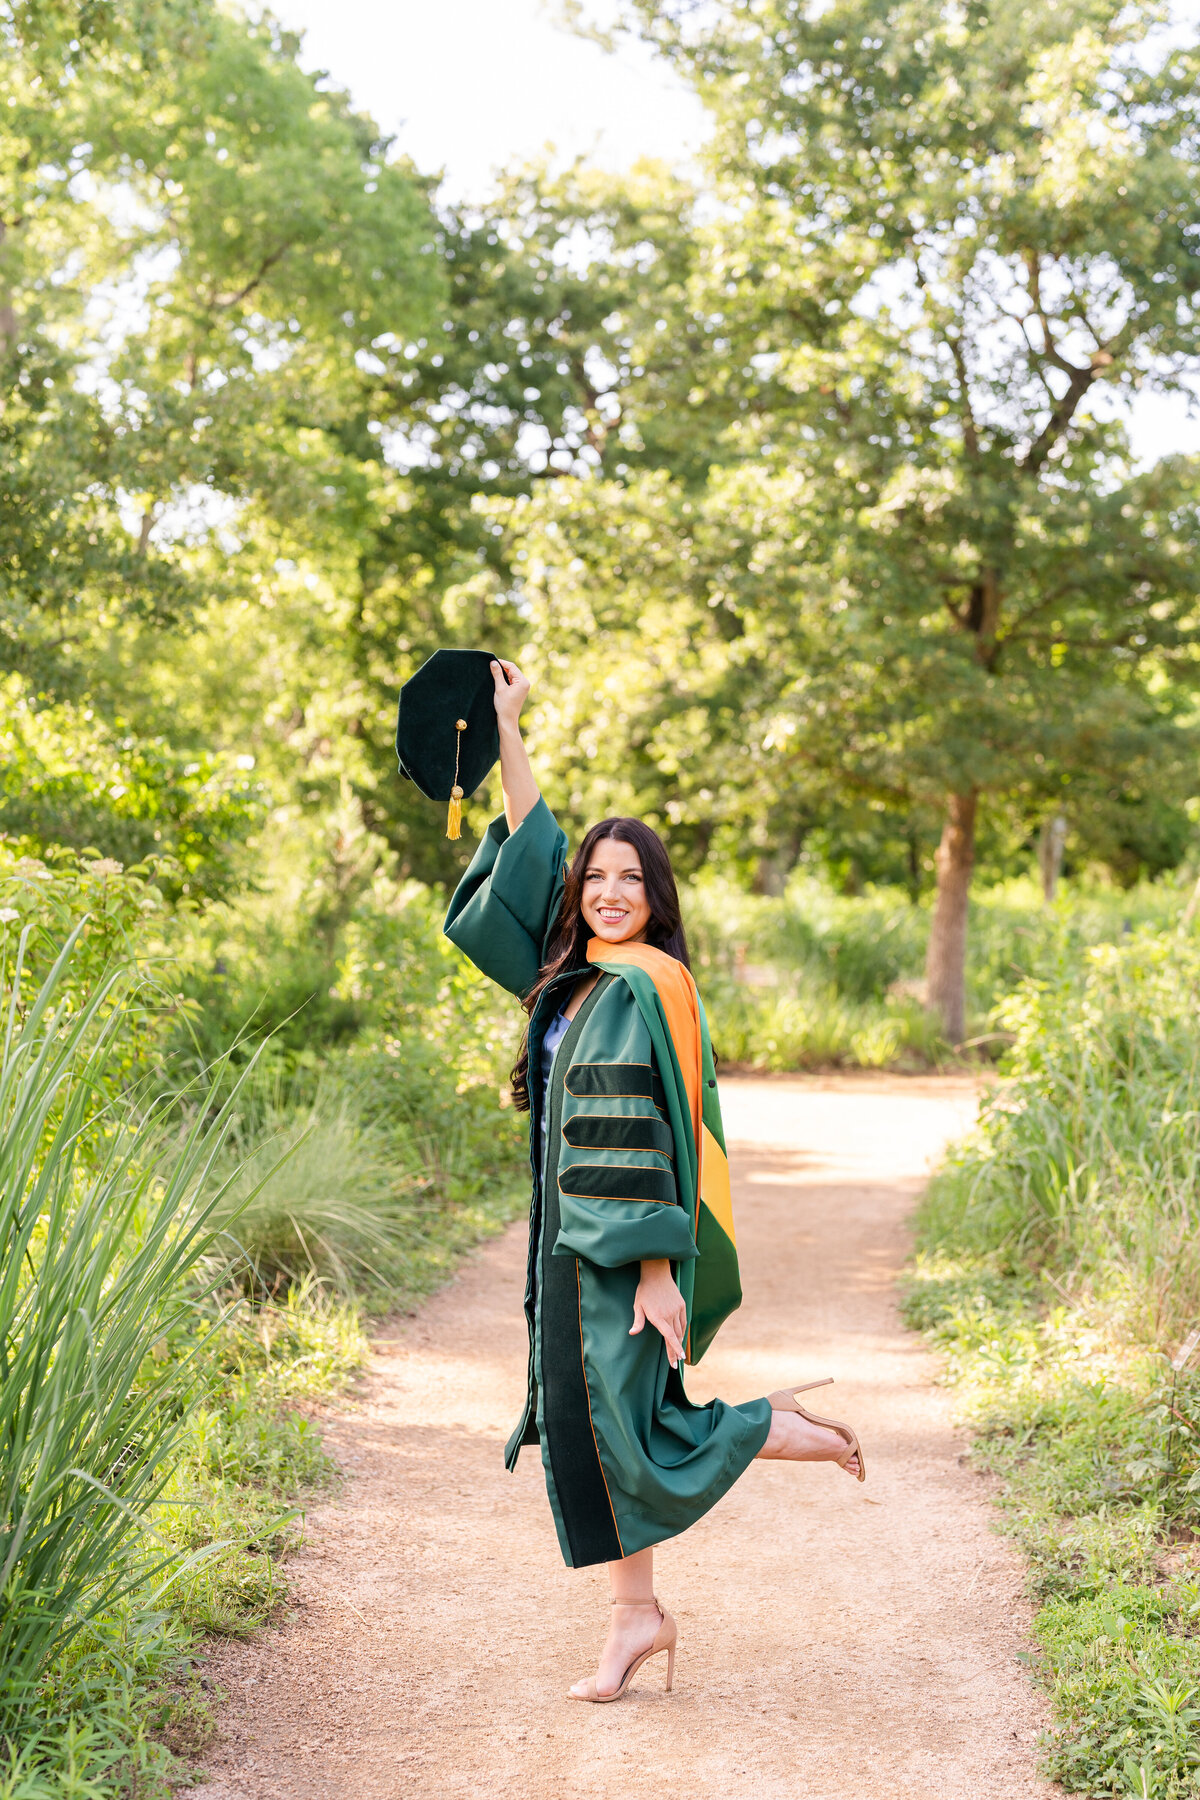 Baylor senior girl wearing doctorate gown, hood and holding up hat while celebrating on pathway surrounded by nature of Houston Arboretum